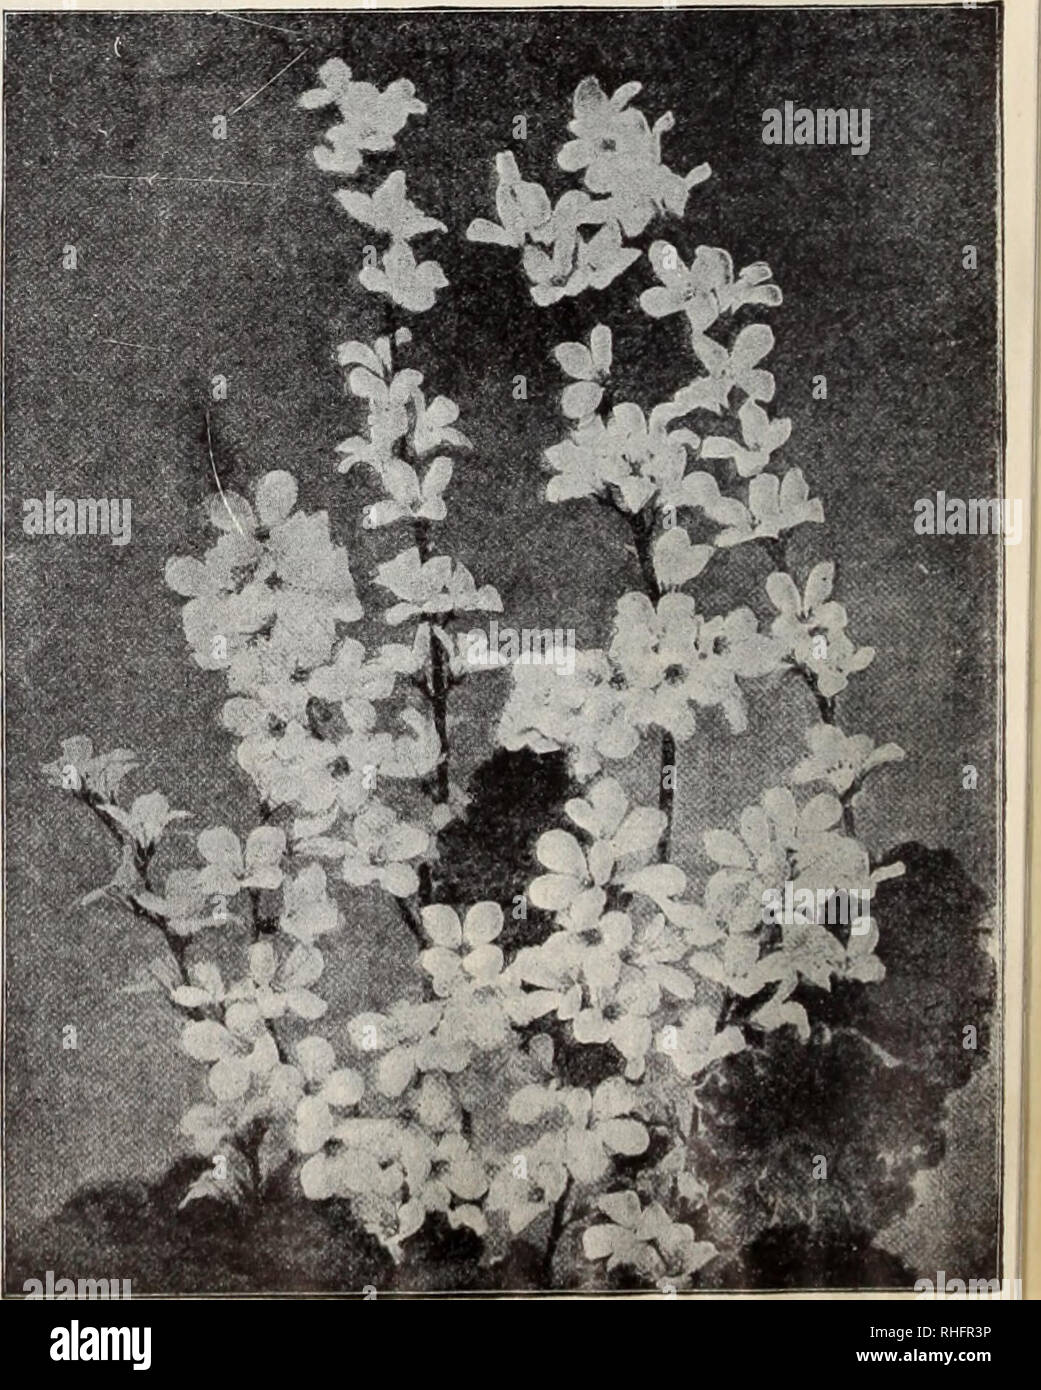 . Boddington's quality bulbs, seeds and plants / Arthur T. Boddington.. Nursery Catalogue. Francoa ramosa (Bridal ^^reath) G.P. neautiful decorative i)laiU, wliich is of the easiest possible green- house culture. During the summer months it produces a large num- ber of elegant sprays of pure white flowers. Excellent for cutting. Height 2''! ft. Pkt. 25 cts. FUNKIA (Plantain Lily). H.P. 2 ft. Summer. Pkt. Coerulea. Blue |o 10 Cordata aureo-variegata. VV'liite 10 Ovata. Bine 10 Sieboldii hybrida. White 10 &quot; marginata. White 10 Gaillardia One of the most useful and desirable annuals and pere Stock Photo